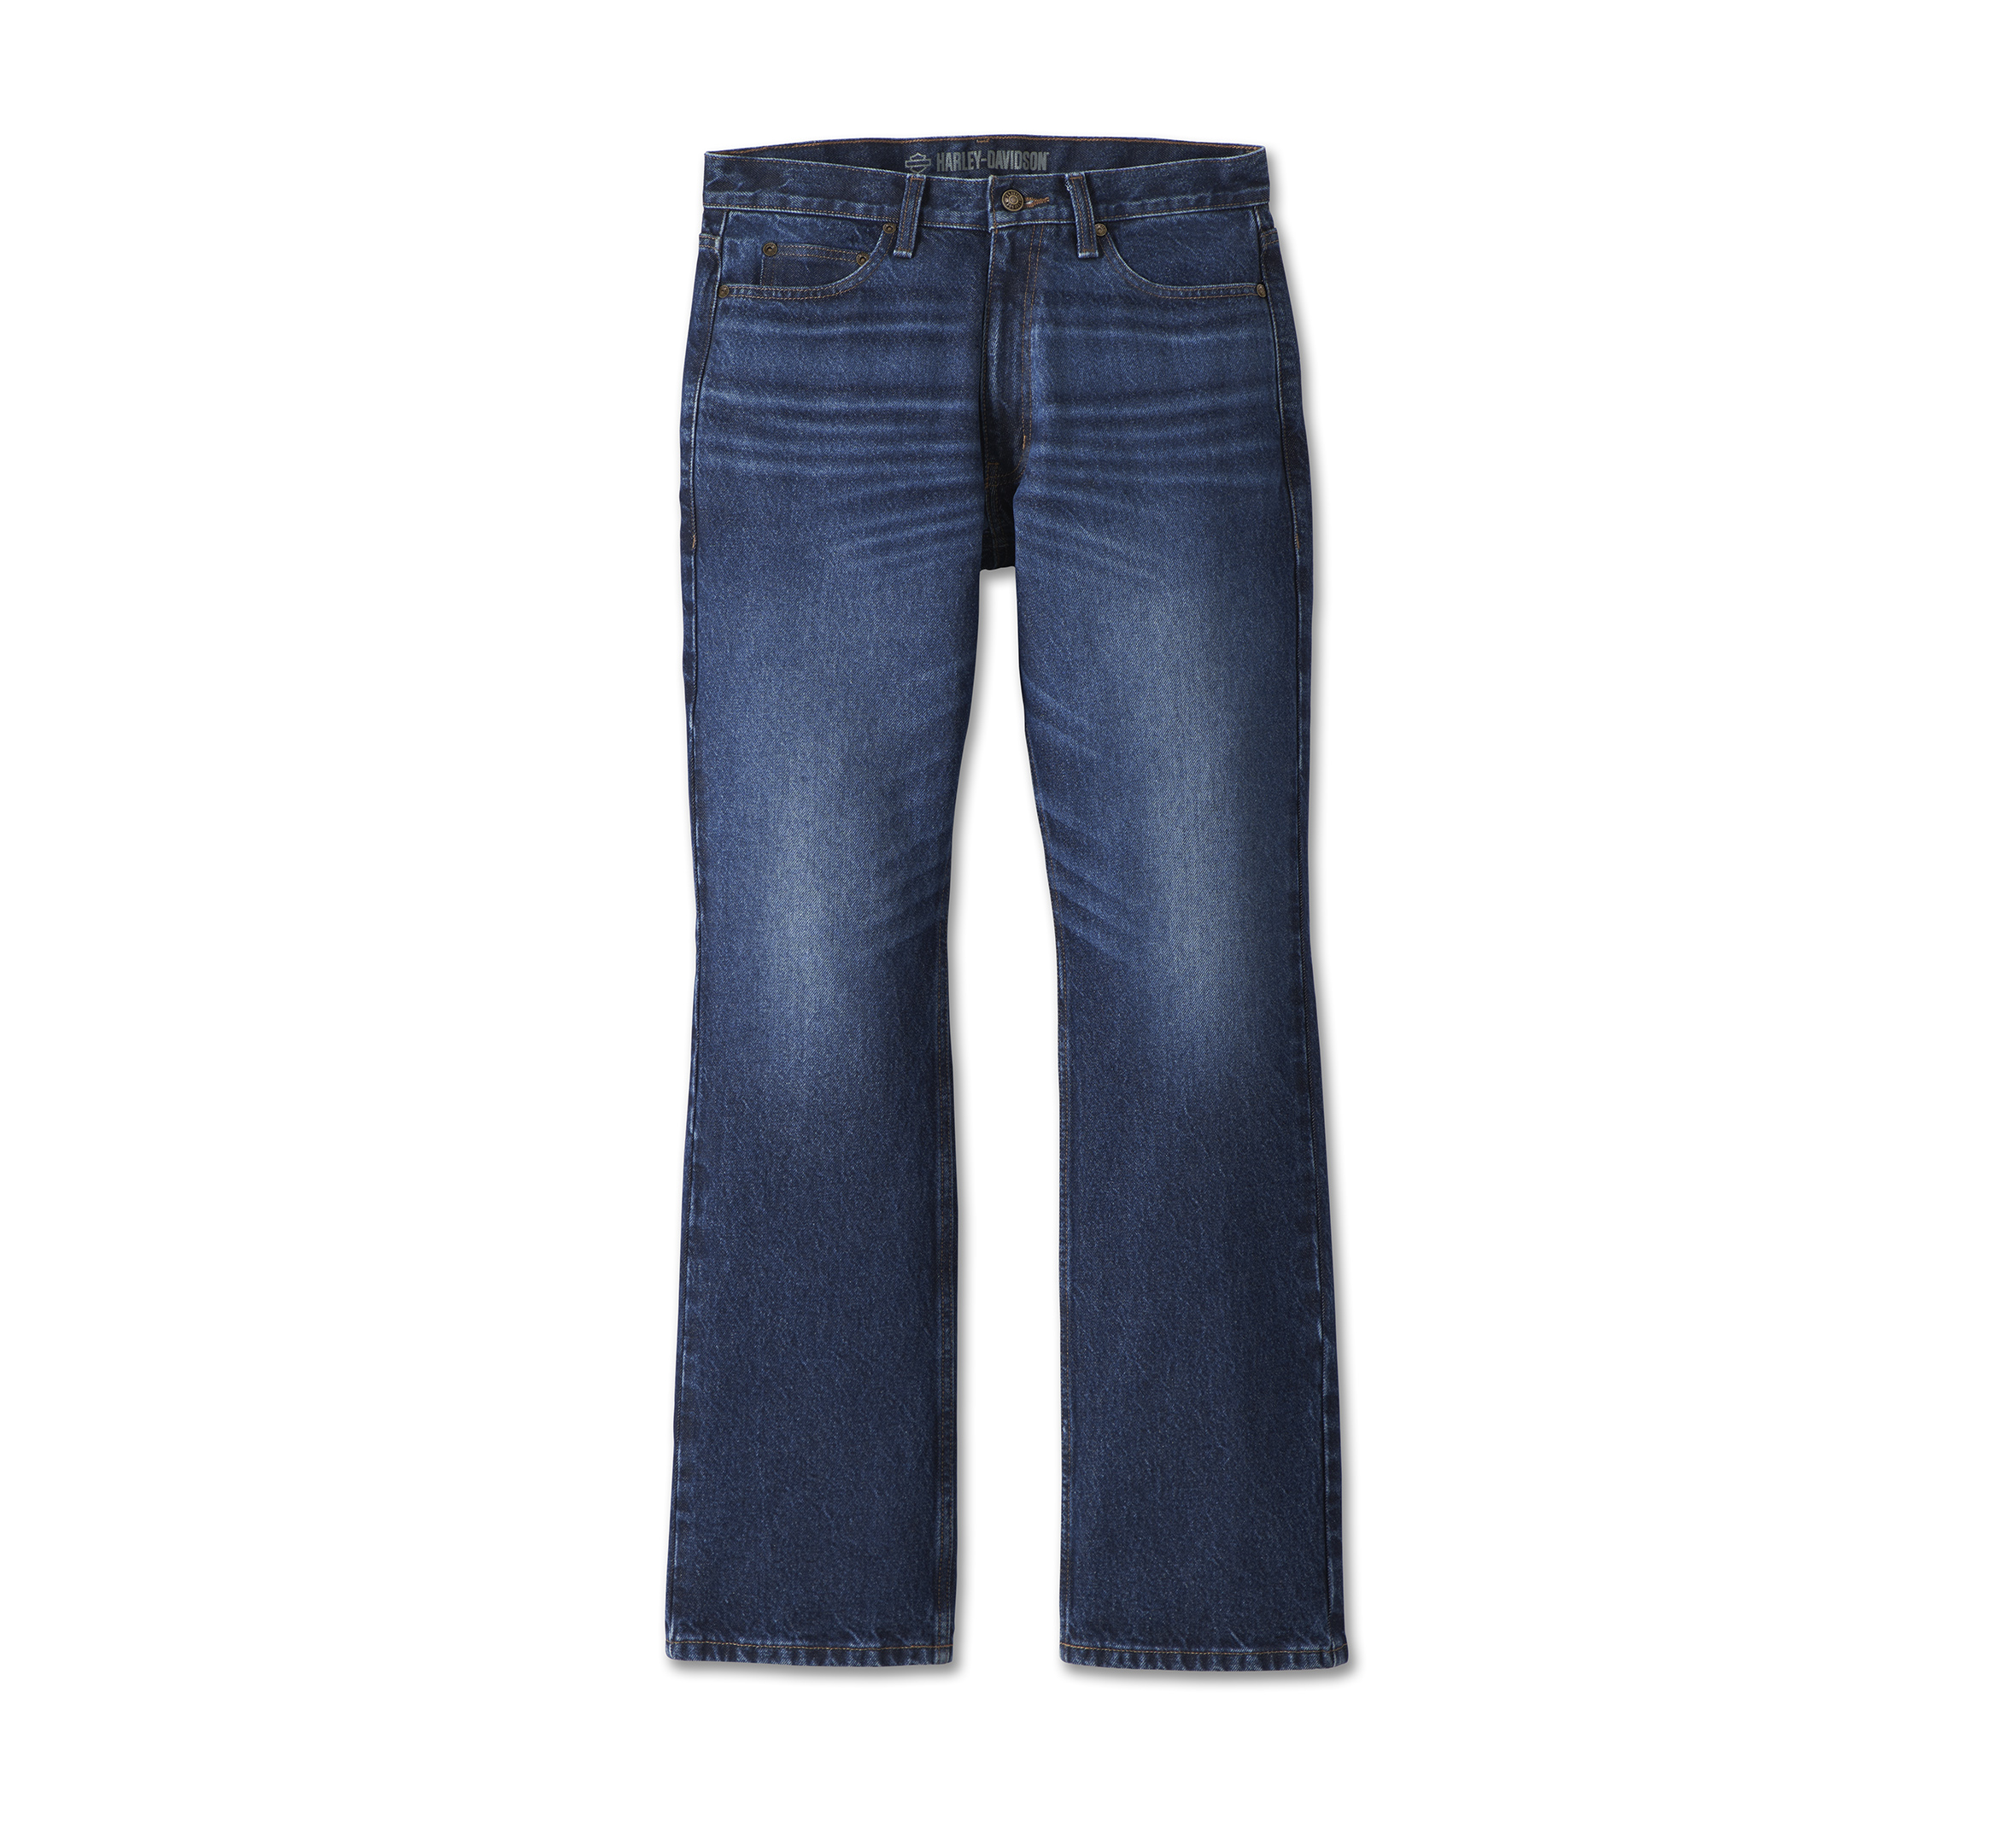 American Eagle Cargo Jeans- Size 0 Short (Inseam 25”) – The Saved Collection